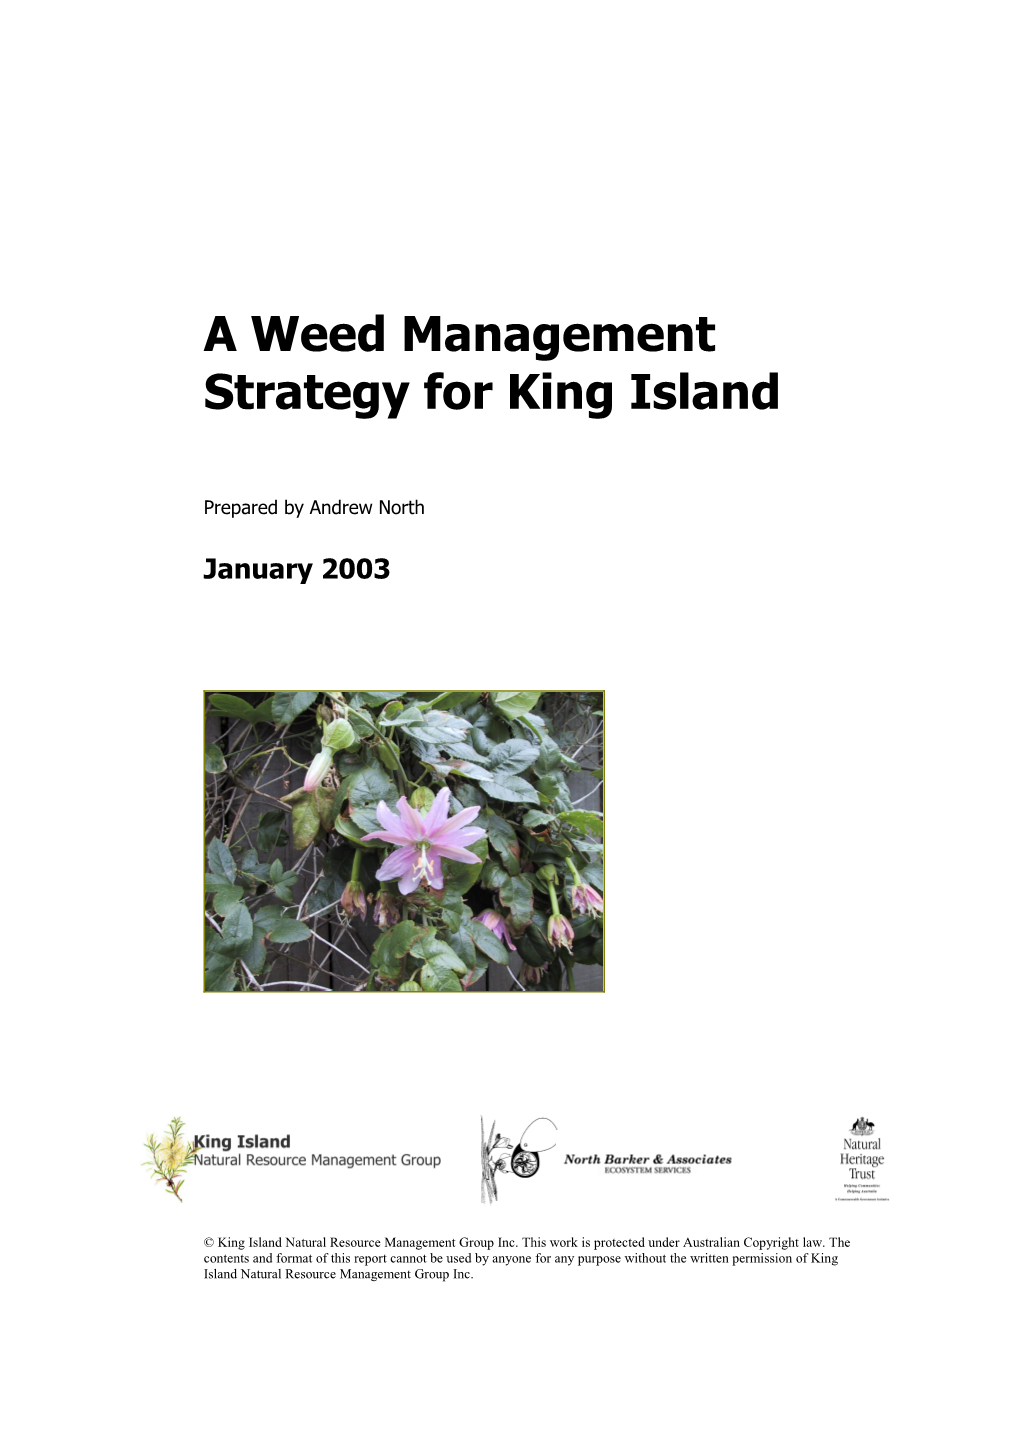 A Weed Management Strategy for King Island